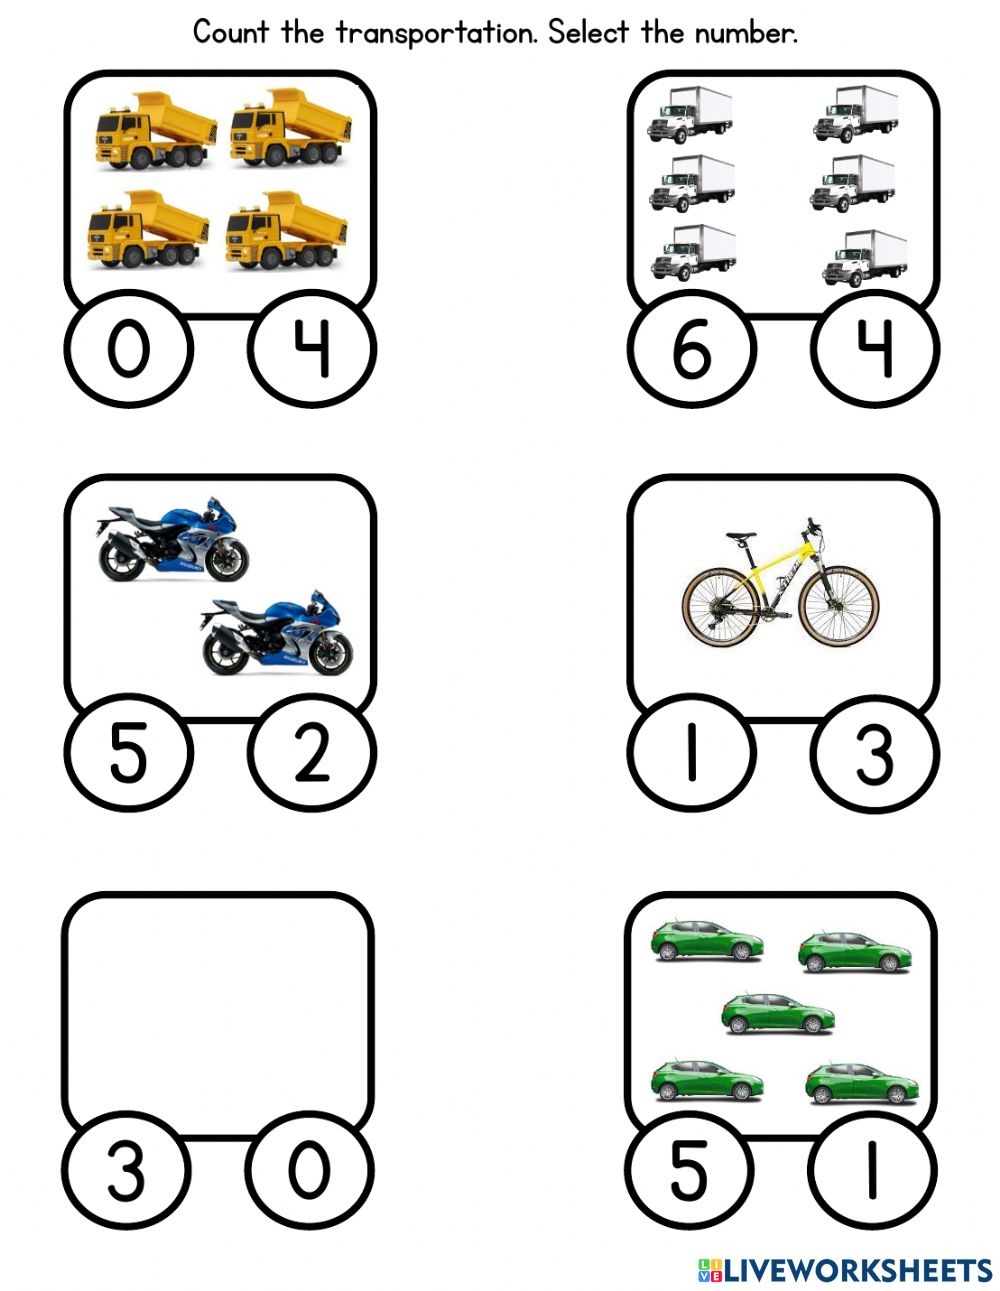 counting-cars-reading-comprehension-worksheet-reading-comprehension-reading-comprehension